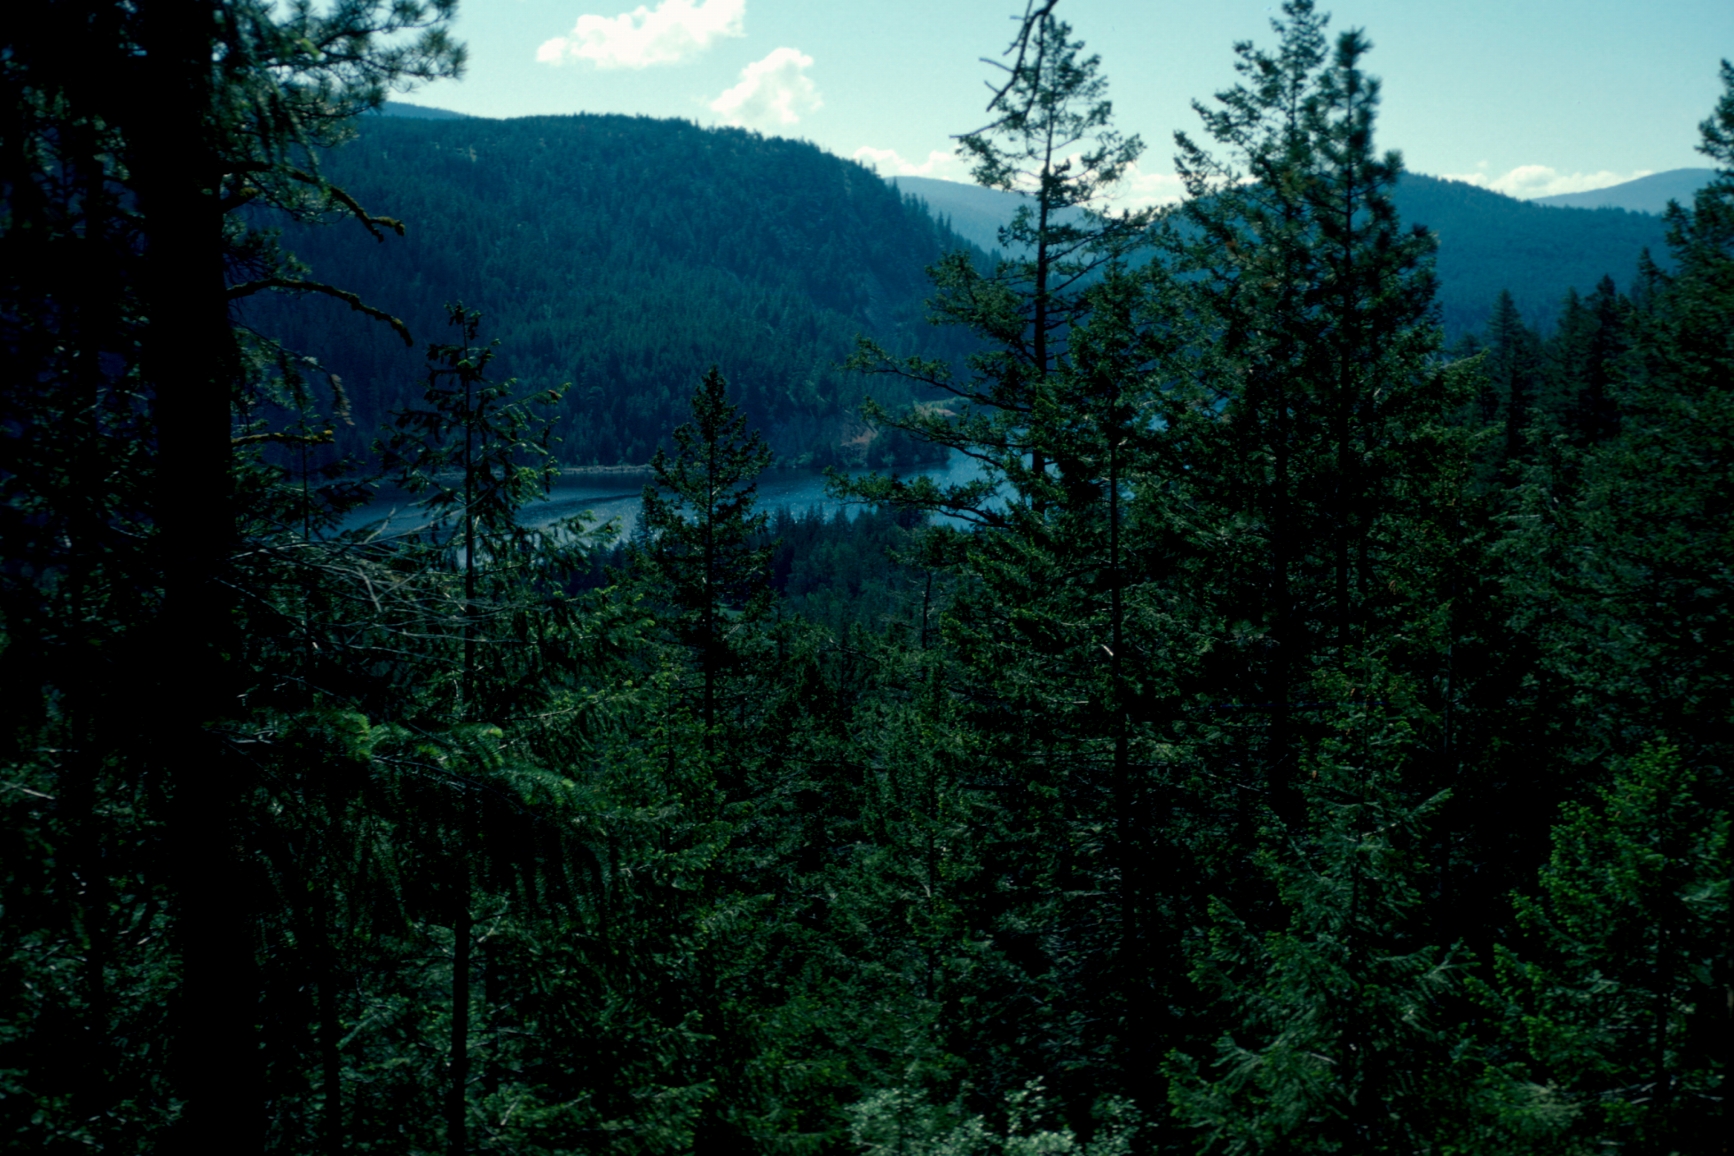 Otter Lake, from the upland of Otter Lake Park